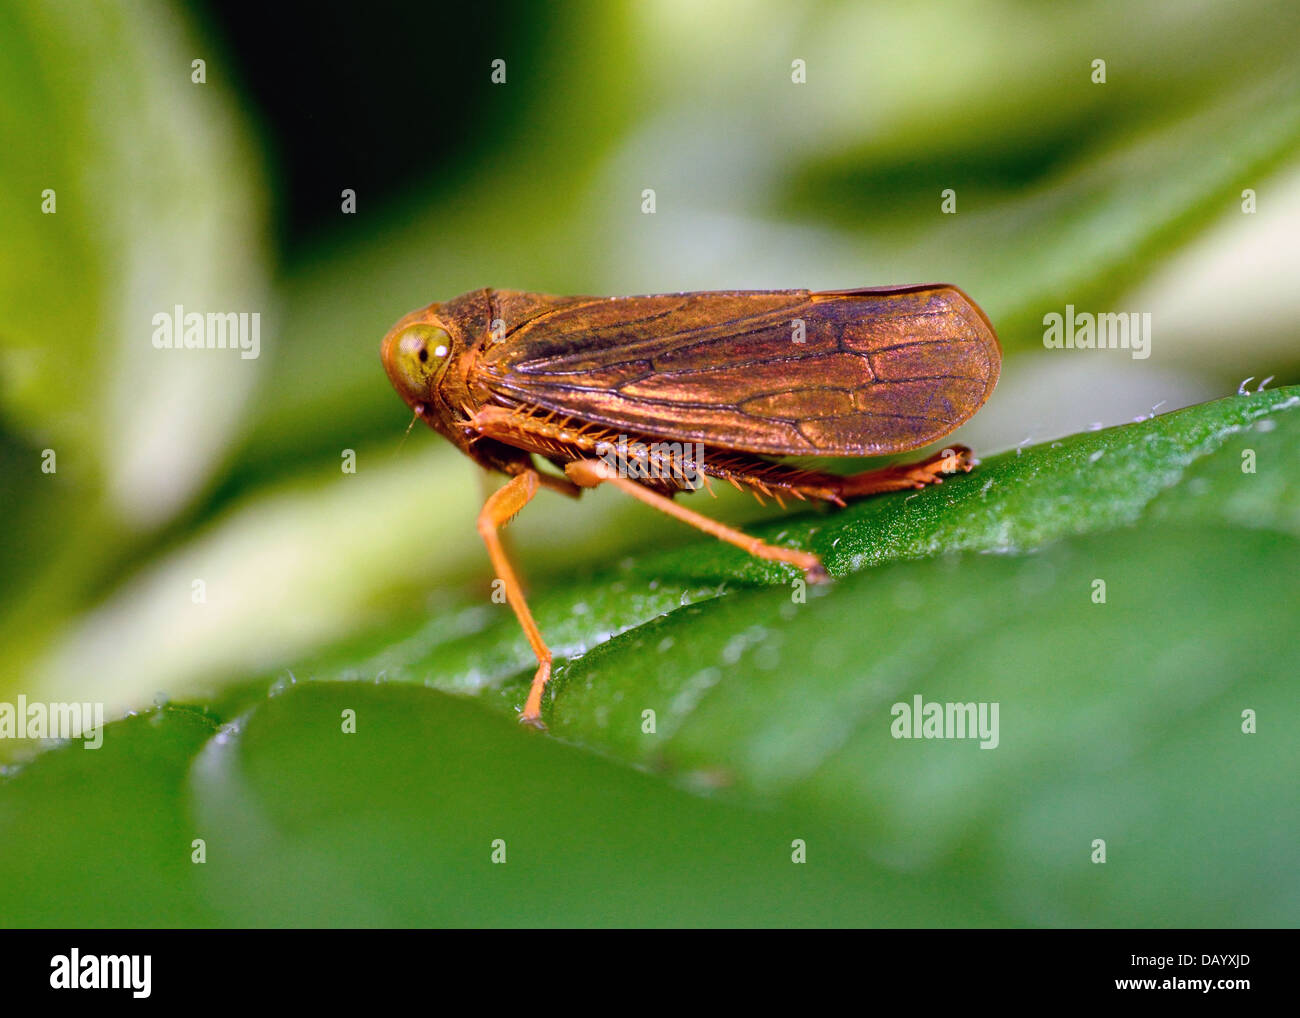 Macro shot of a Leafhopper insect perched on a green plant leaf. Stock Photo